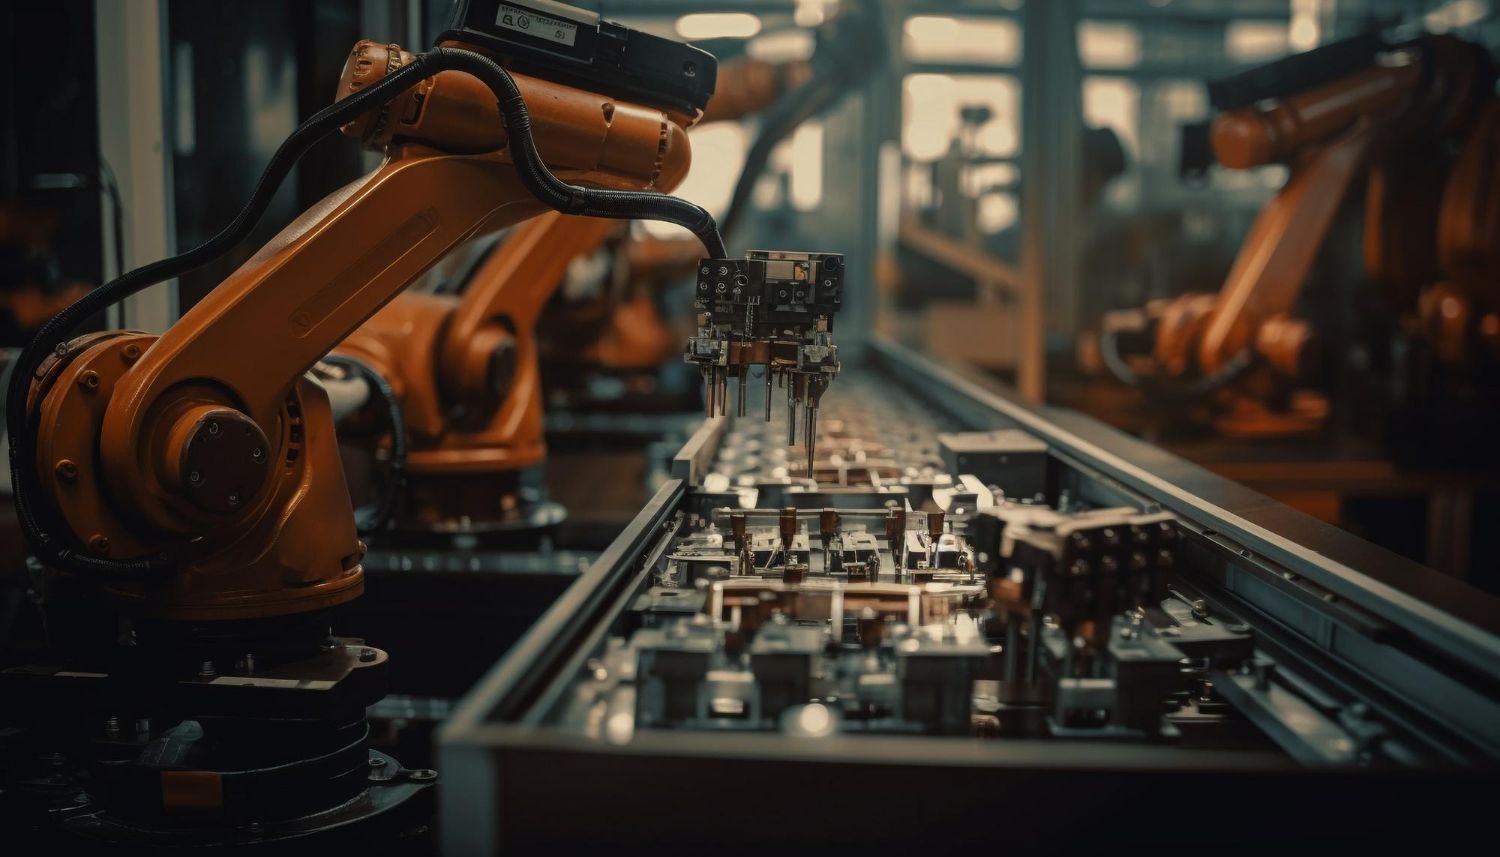 Cobots in automotive manufacturing - Photo 2